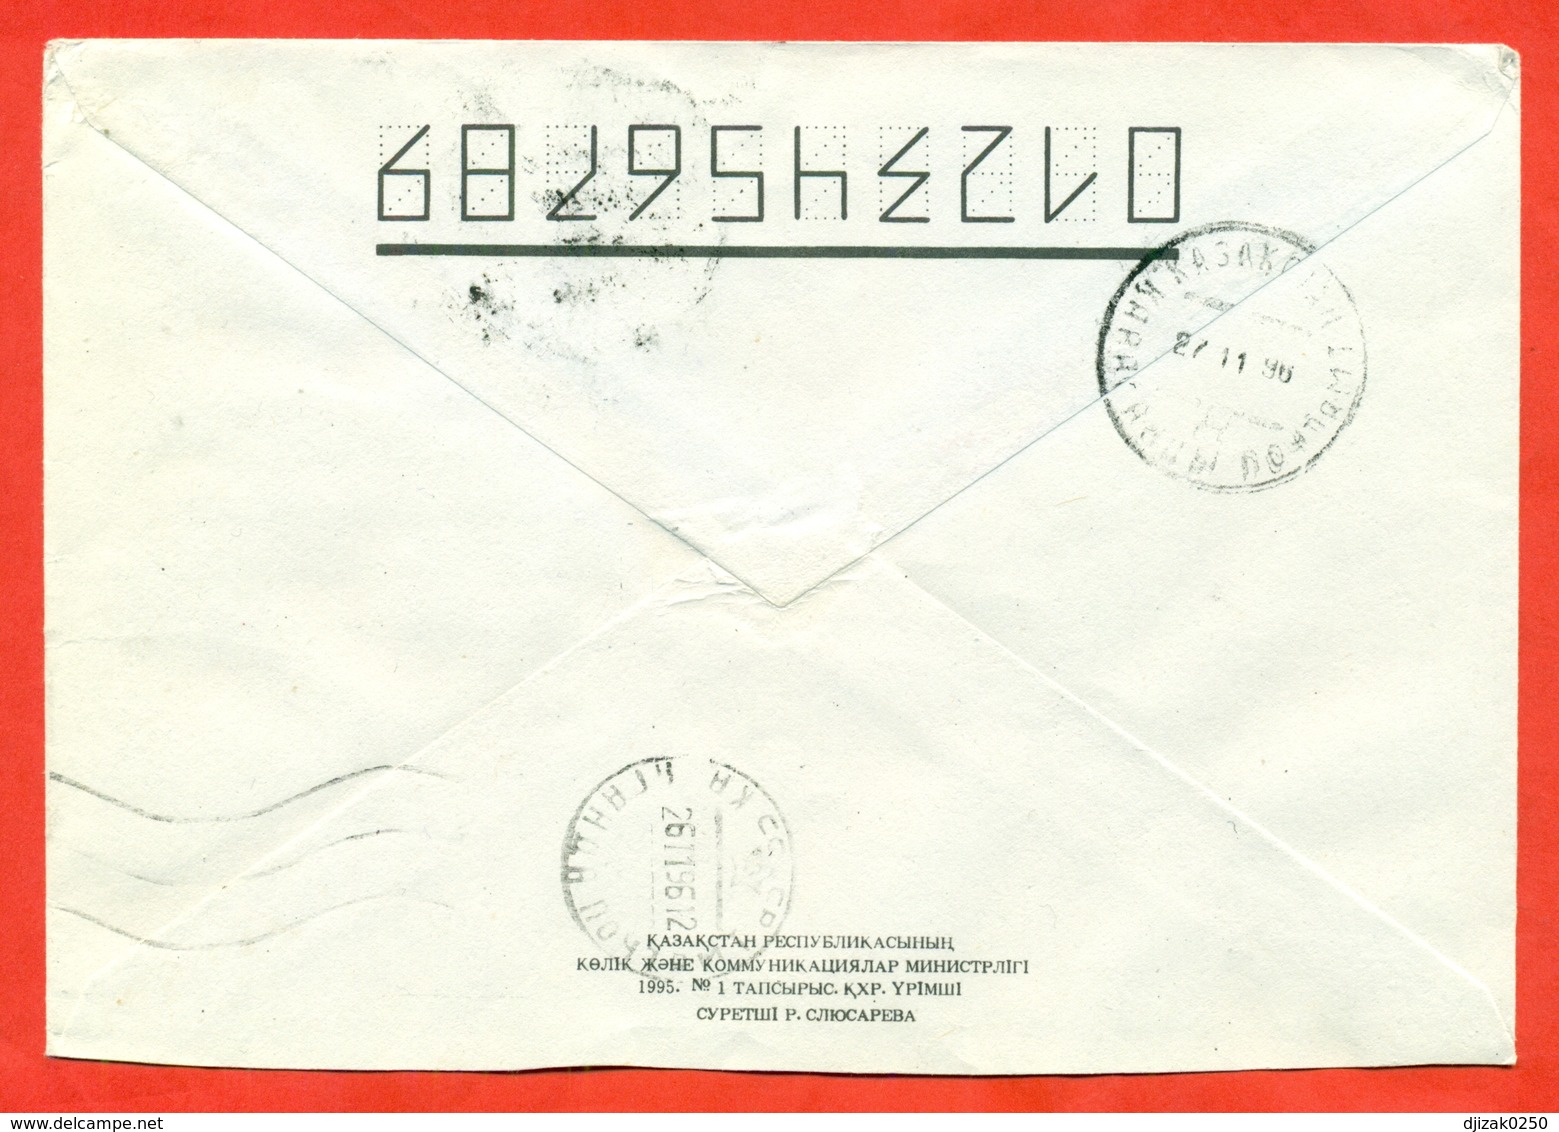 Kazakhstan 1996.The Envelope Past Mail With The Stamp Of The New Tariff. - Mahatma Gandhi